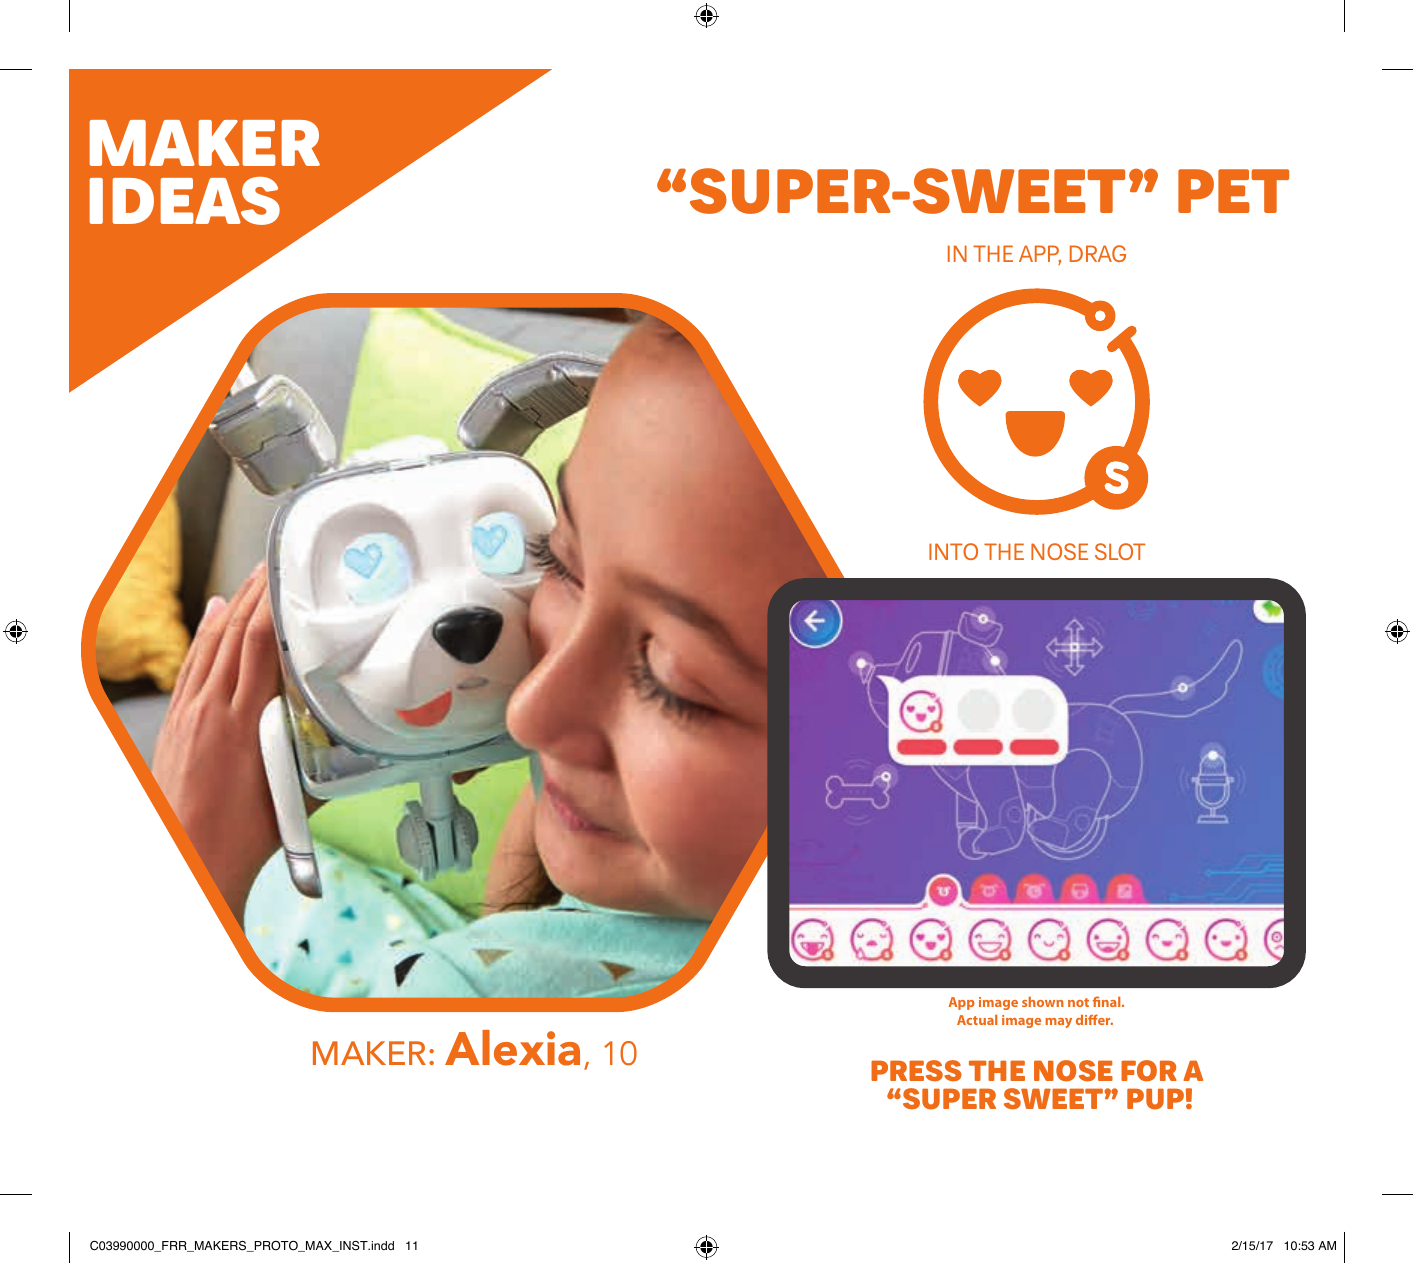 App image shown not ﬁnal.Actual image may diﬀer. MAKERIDEASMAKER: Alexia, 10“SUPER-SWEET” PETIN THE APP, DRAG PRESS THE NOSE FOR A “SUPER SWEET” PUP!INTO THE NOSE SLOT DOWNLOAD THEFURREAL MAKERS™*PROTO MAX™* APPLINK TO THEAPPTAP TO INITIATE CONNECTIONPRESS NOSE TO CONNECTMAKE SURE THAT Bluetooth® IS ENABLED ON YOUR MOBILE DEVICE5.App available through June 30, 2019.  FURREAL MAKERS™* PROTO MAX™* app works with select iPhone®, iPad®, iPod touch®, and Android devices. Updates aﬀect compatibility. Check furrealmakers.com for details. Ask a parent ﬁrst. Not available in all languages. Apple, the Apple logo, iPhone, iPad, and iPod touch are trademarks of Apple Inc., registered in the U.S. and other countries. App Store is a service mark of Apple Inc. Android, Google Play, and the Google Play logo are trademarks of Google Inc.App image shown not ﬁnal.Actual image may diﬀer.App images shown not ﬁnal. Actual images may diﬀer.MAKE THE CONNECTION!TAPC03990000_FRR_MAKERS_PROTO_MAX_INST.indd   11 2/15/17   10:53 AM